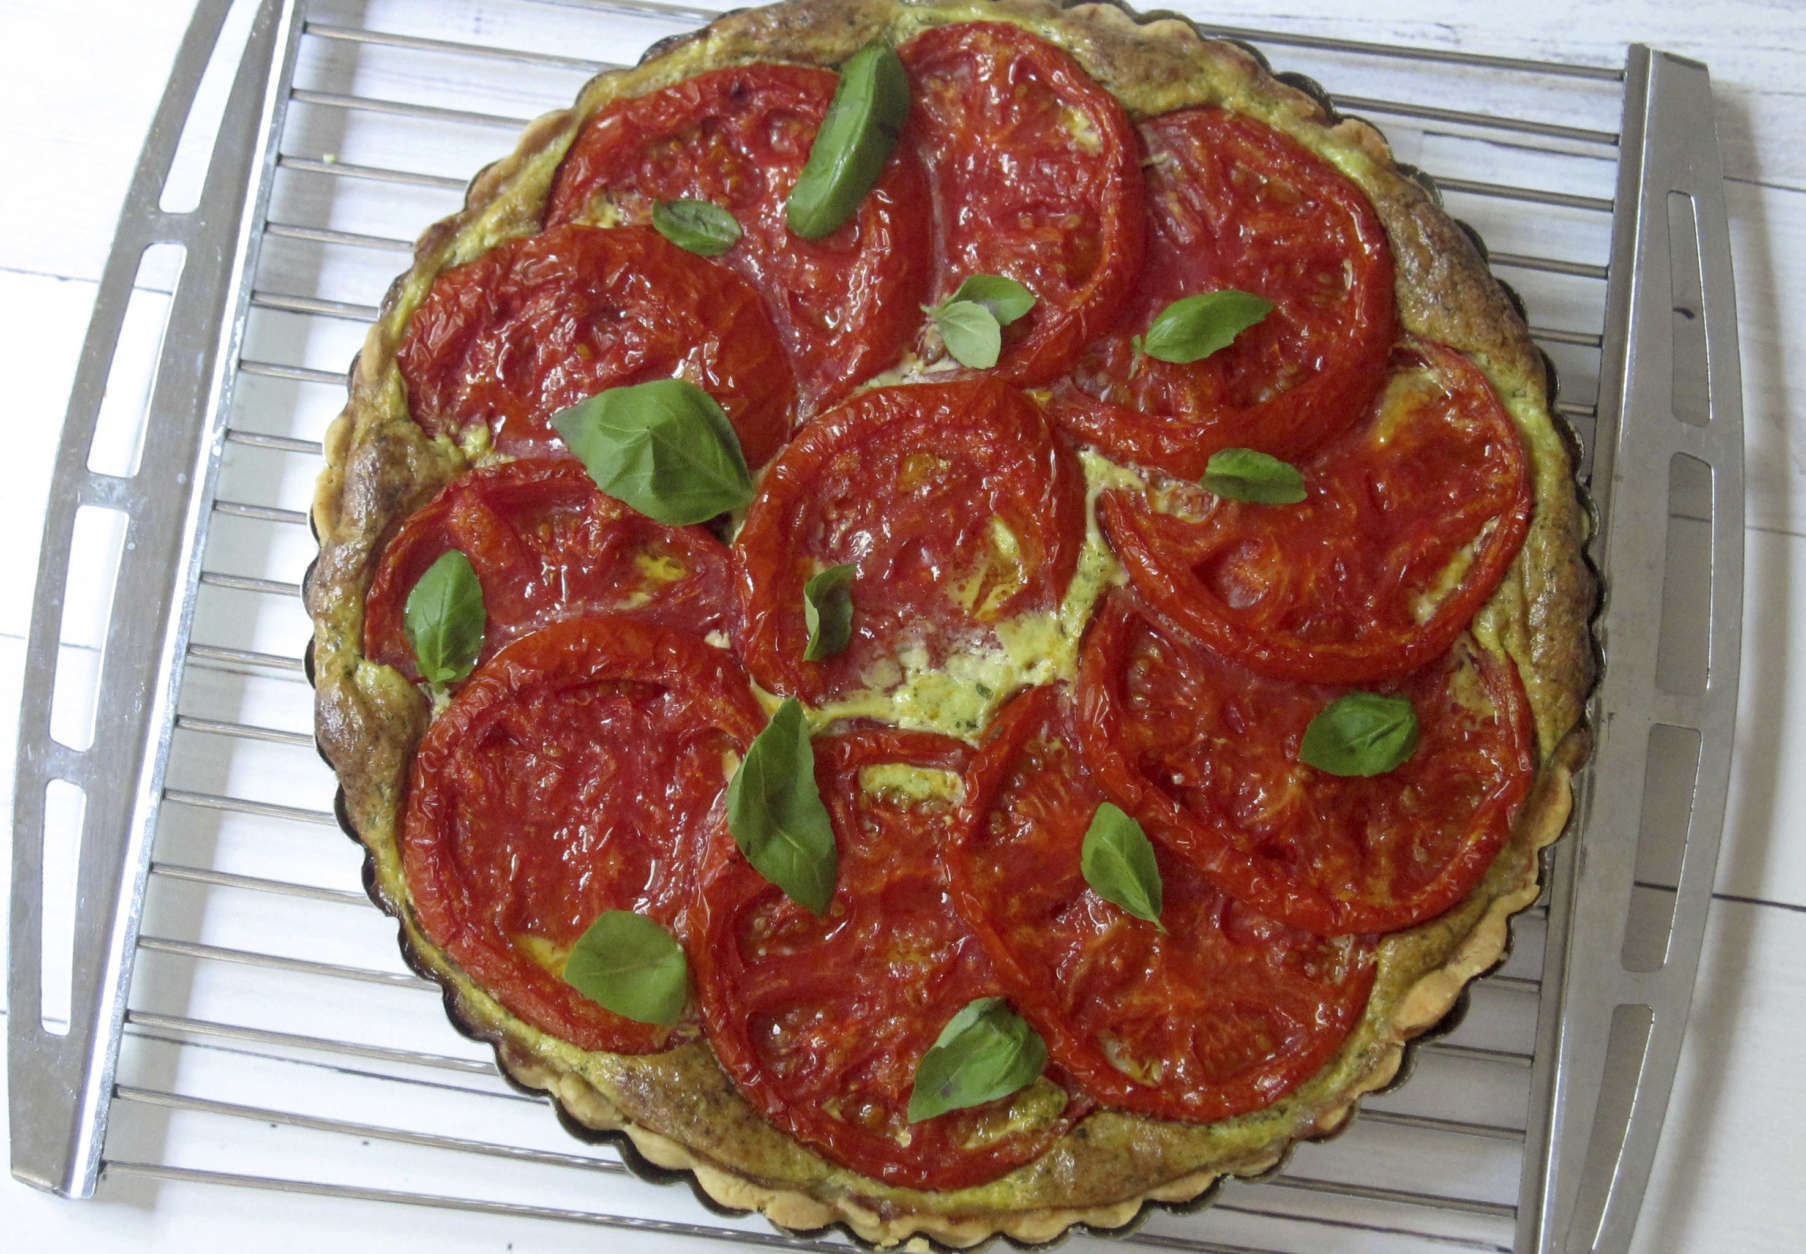 This July 26, 2017 photo shows a tomato, mozzarella and basil tart in New York. This dish is from a recipe by Sara Moulton. (Sara Moulton via AP)